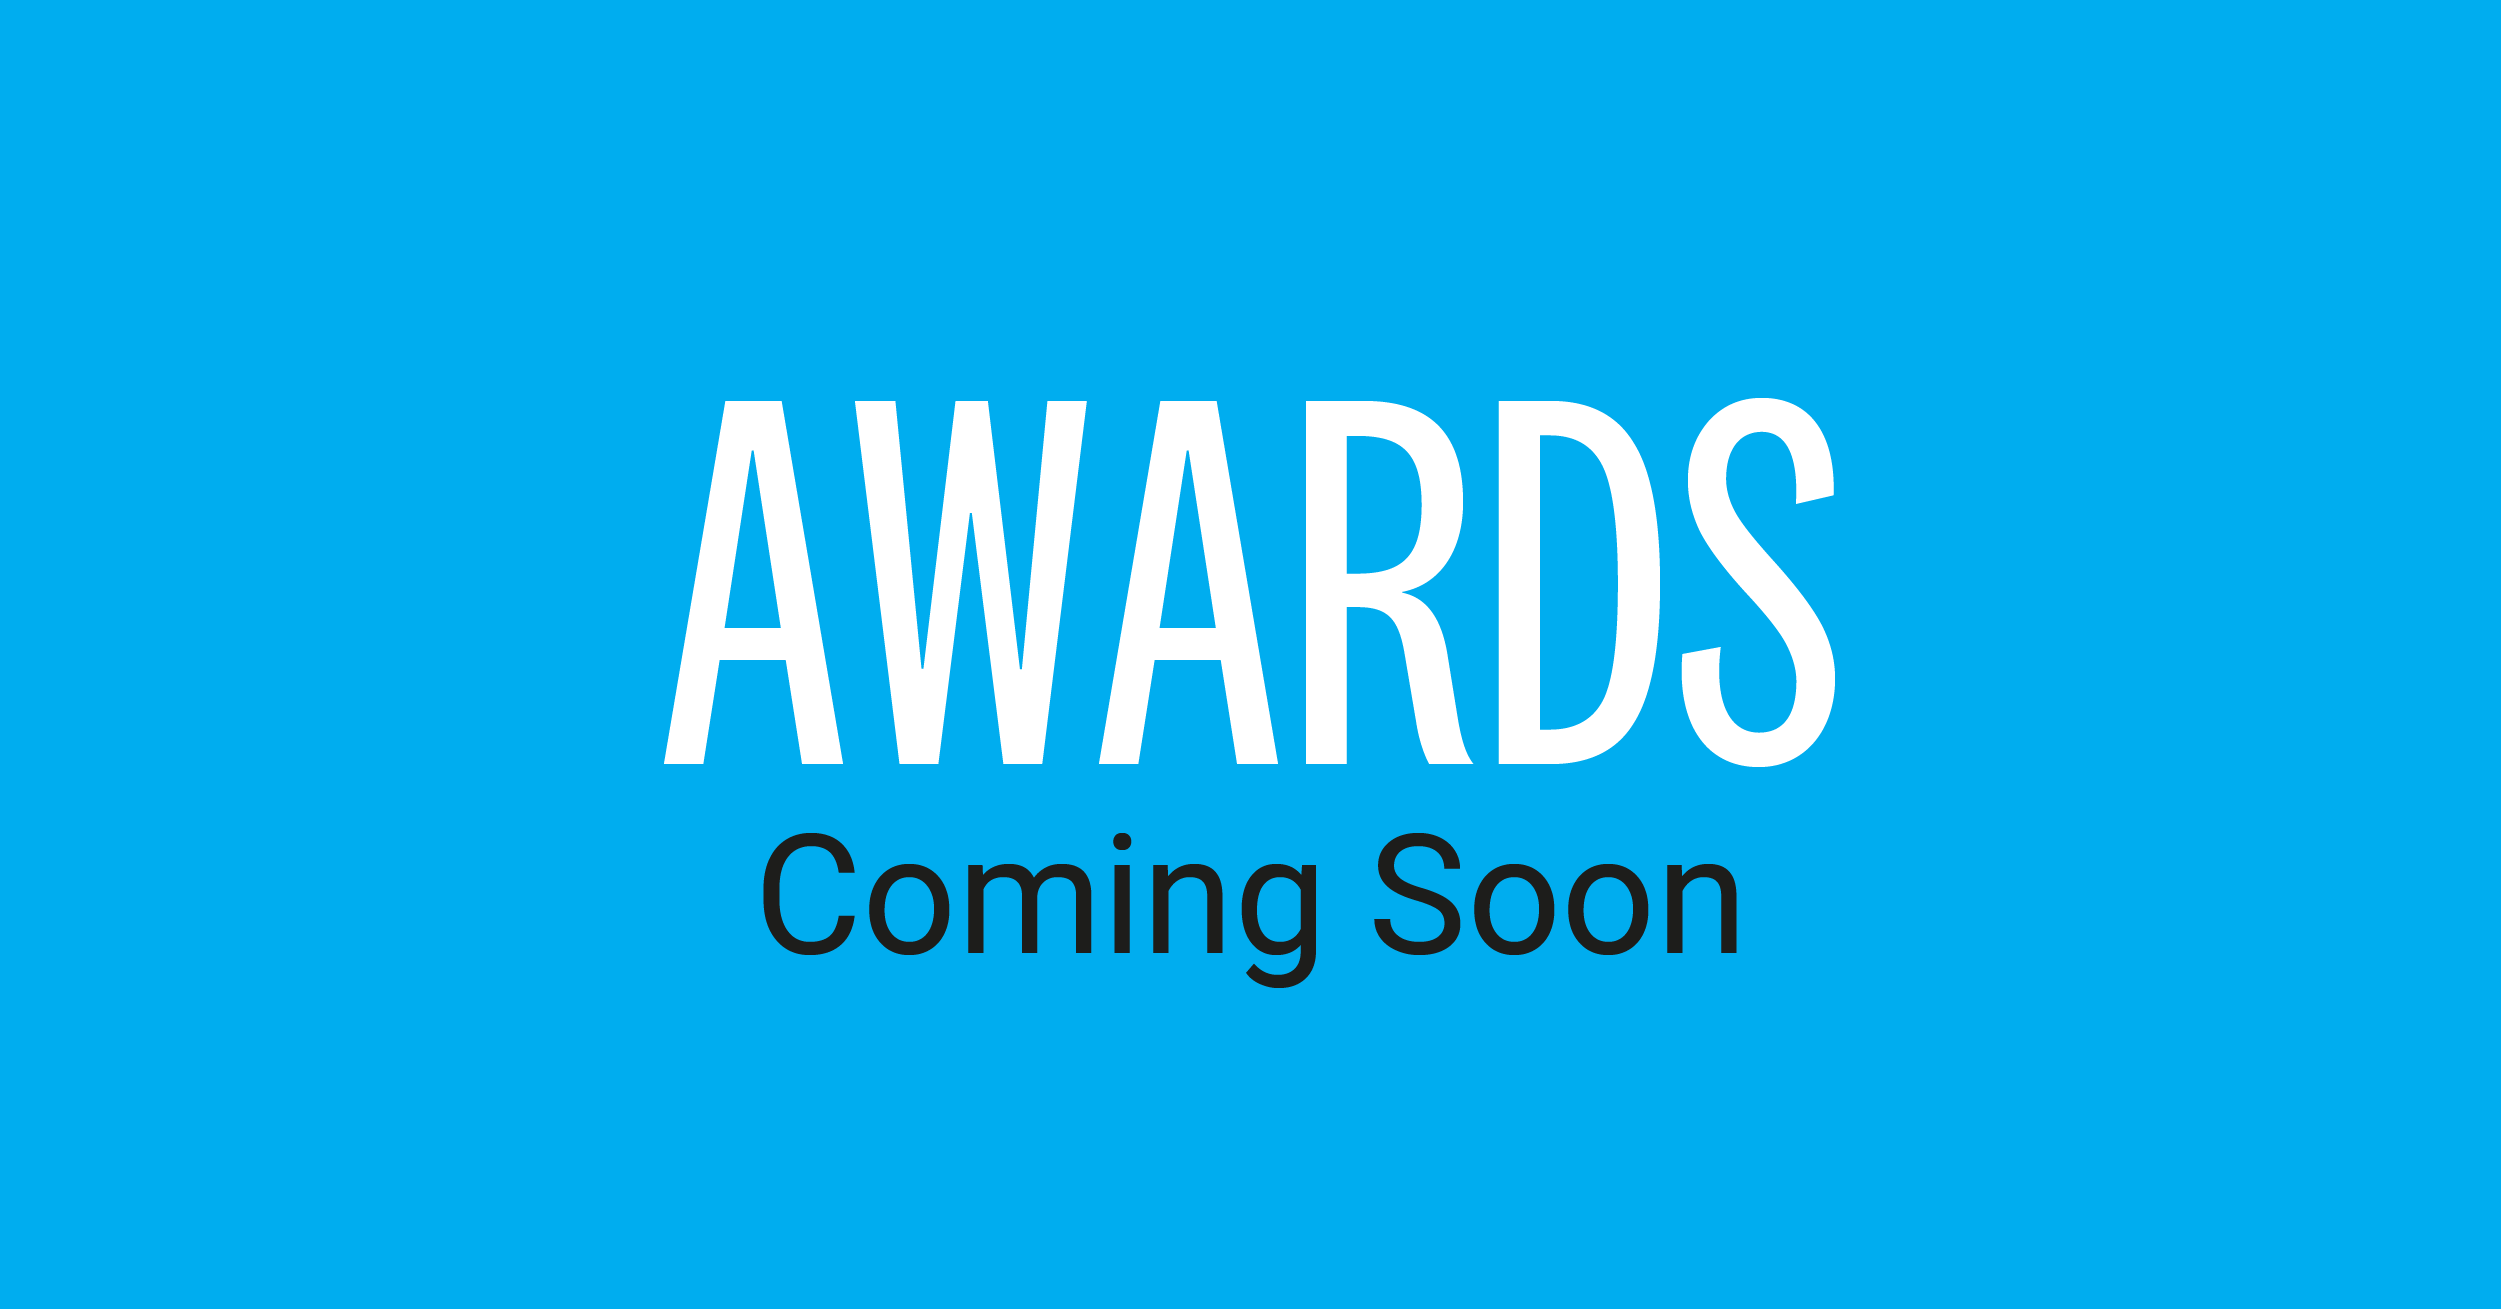 awards-coming-soon-banner-1200x628px